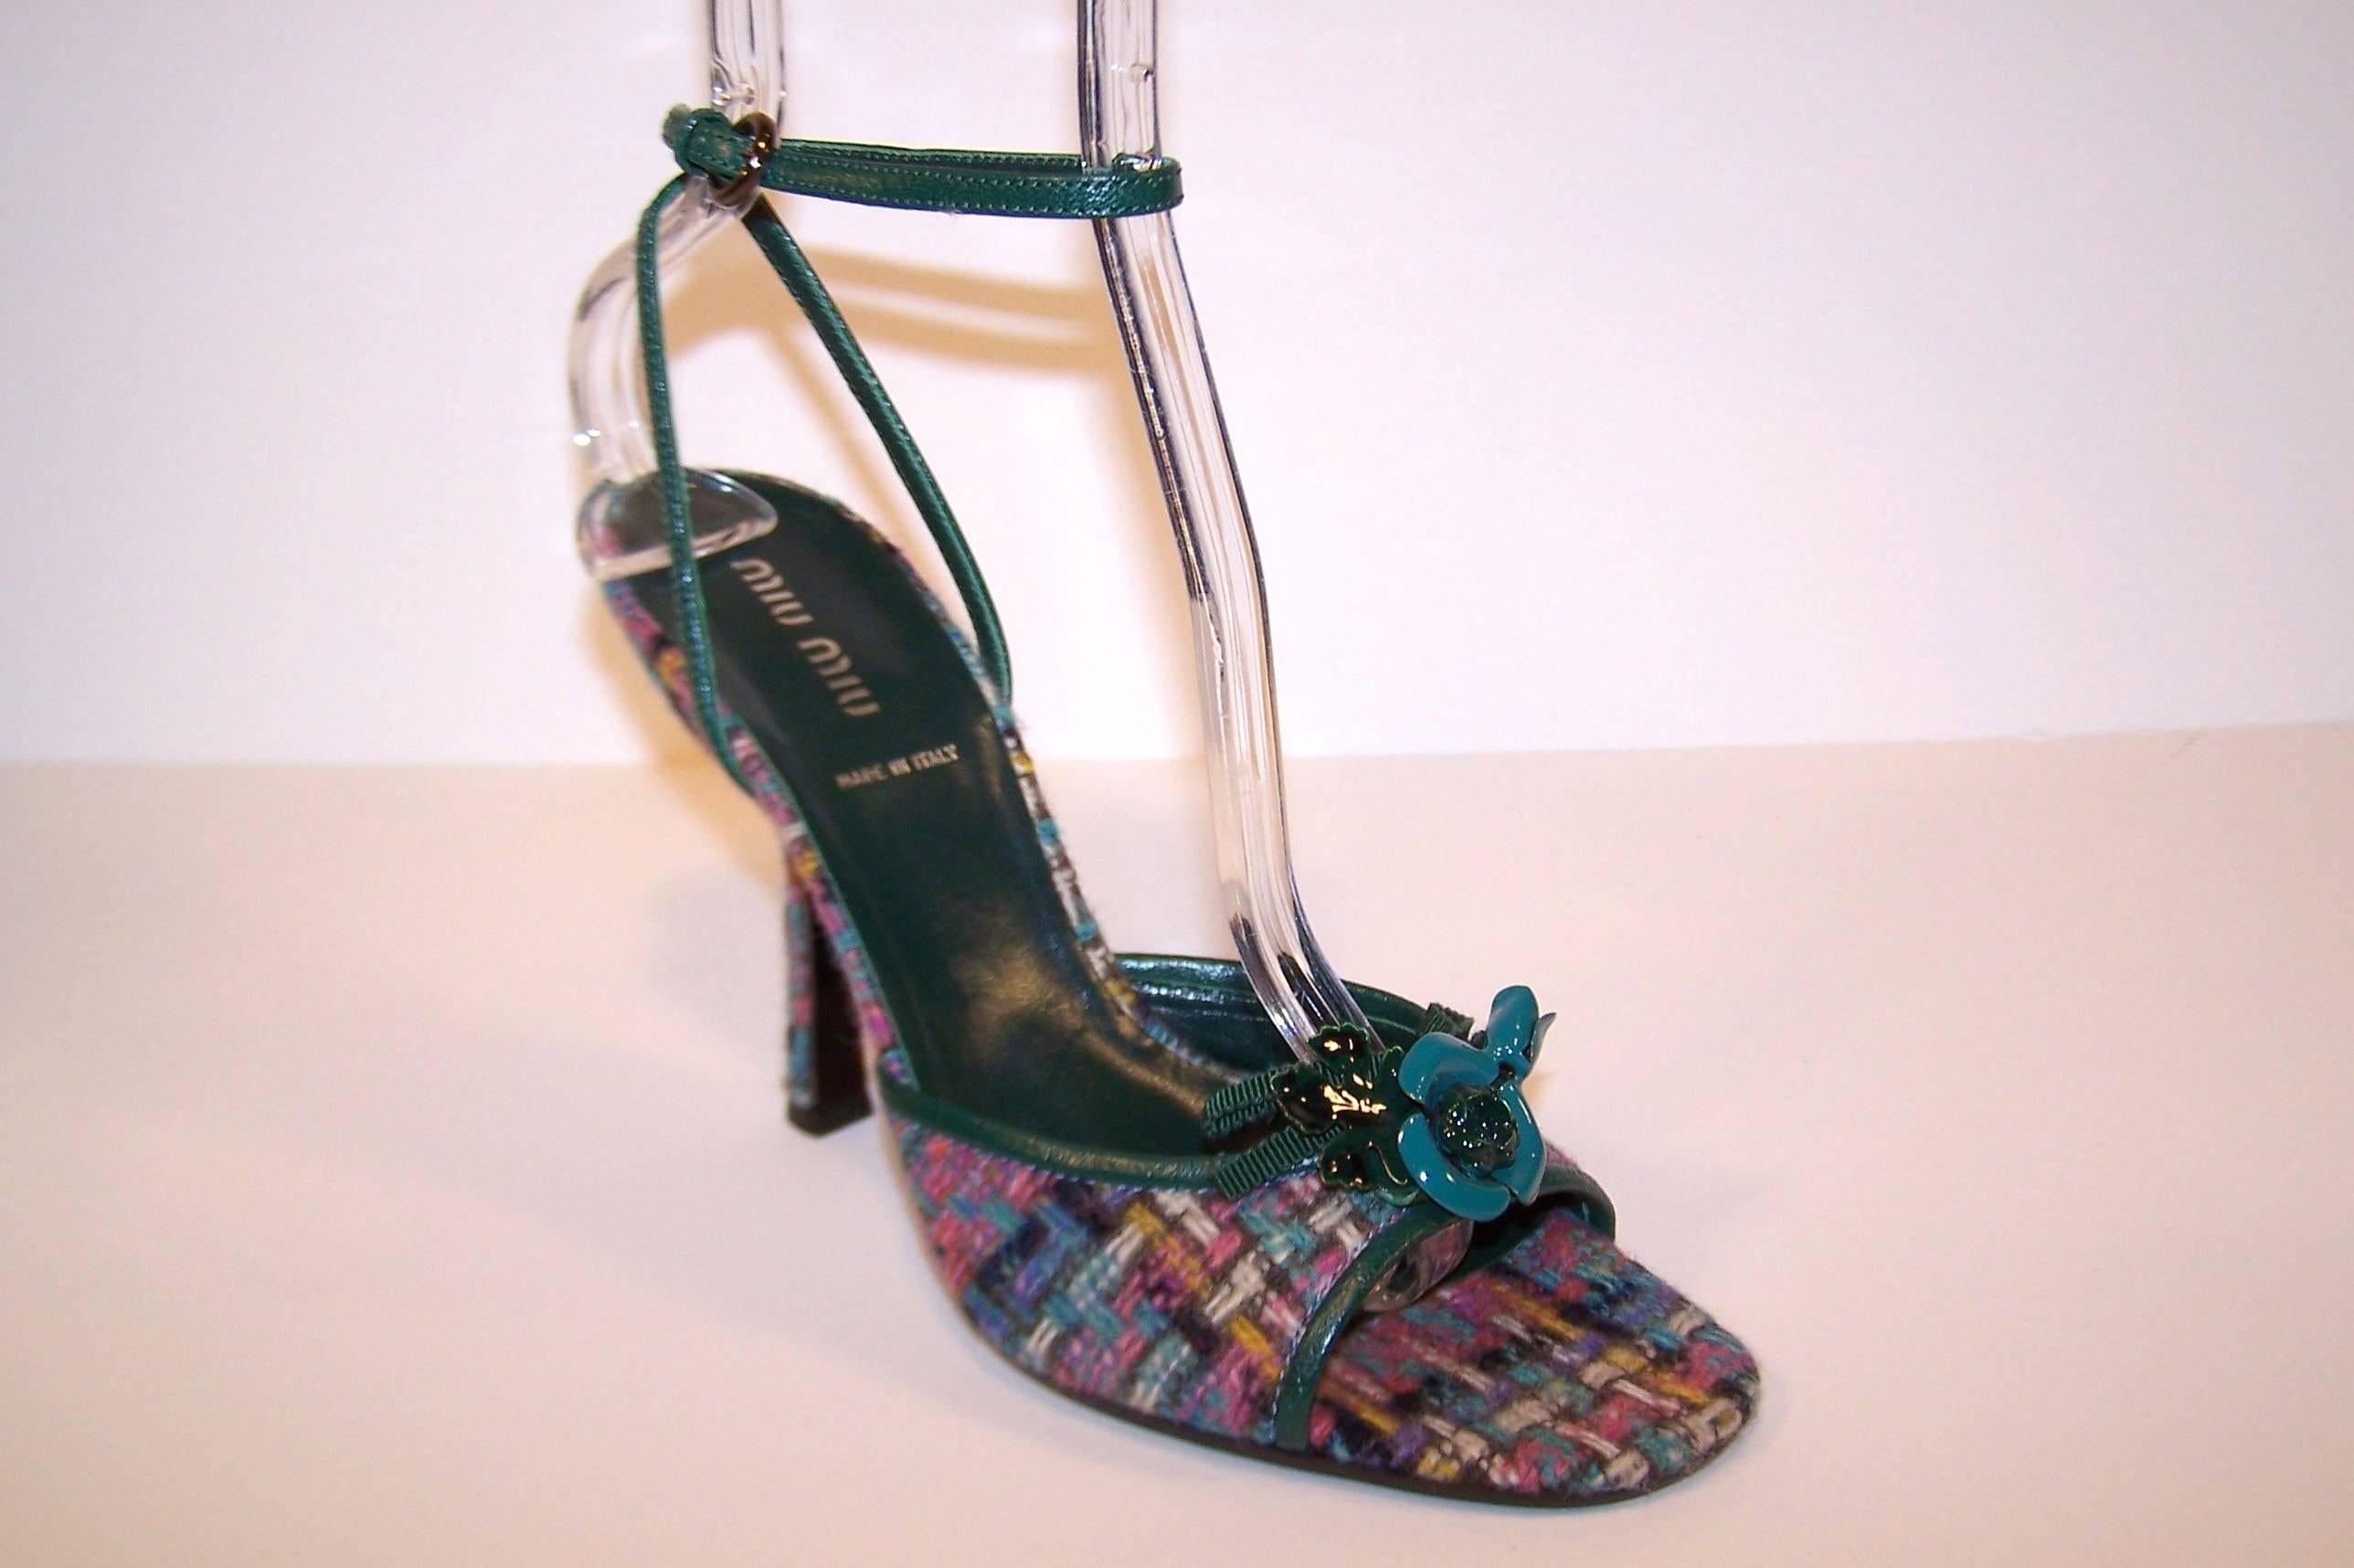 Black Never Worn Miu Miu Wool Tweed Strappy Sandals With Green Leather Details